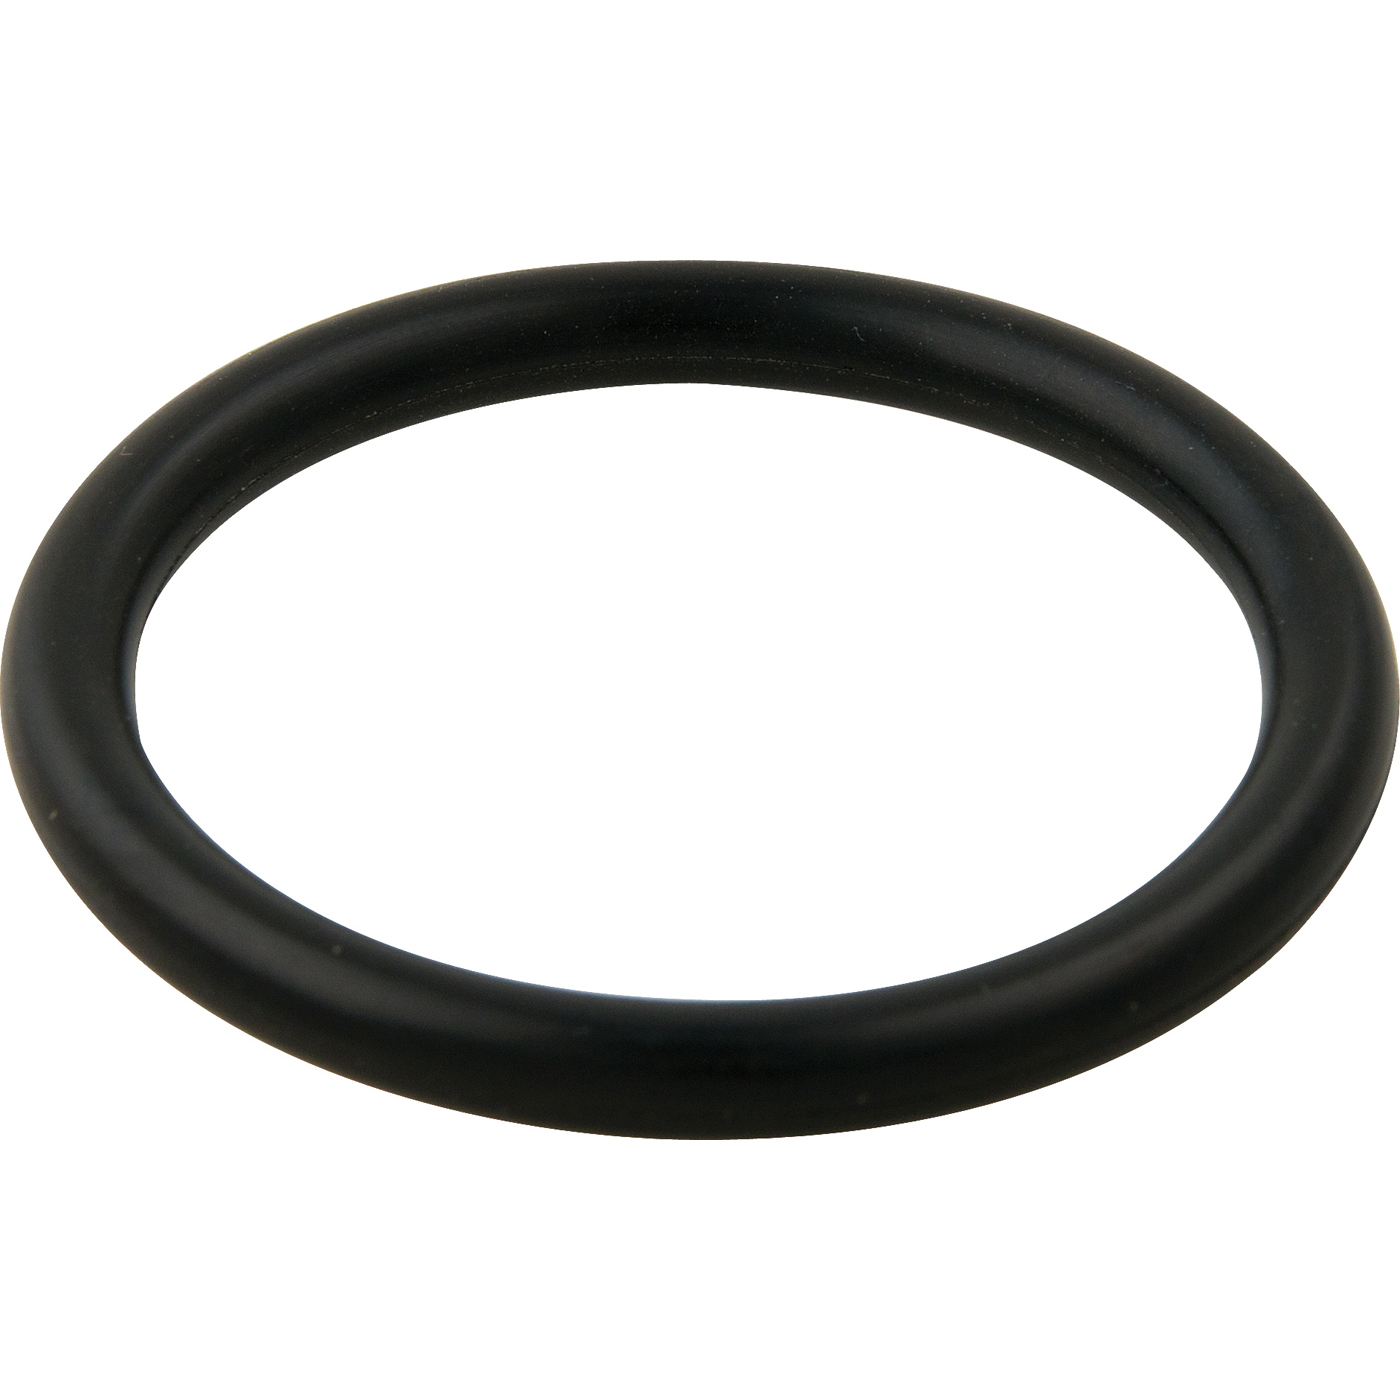 bay Person in charge Clan O-ring - 1-3/4" ID x 2-1/8" OD x 3/16" thick - Master Plumber®